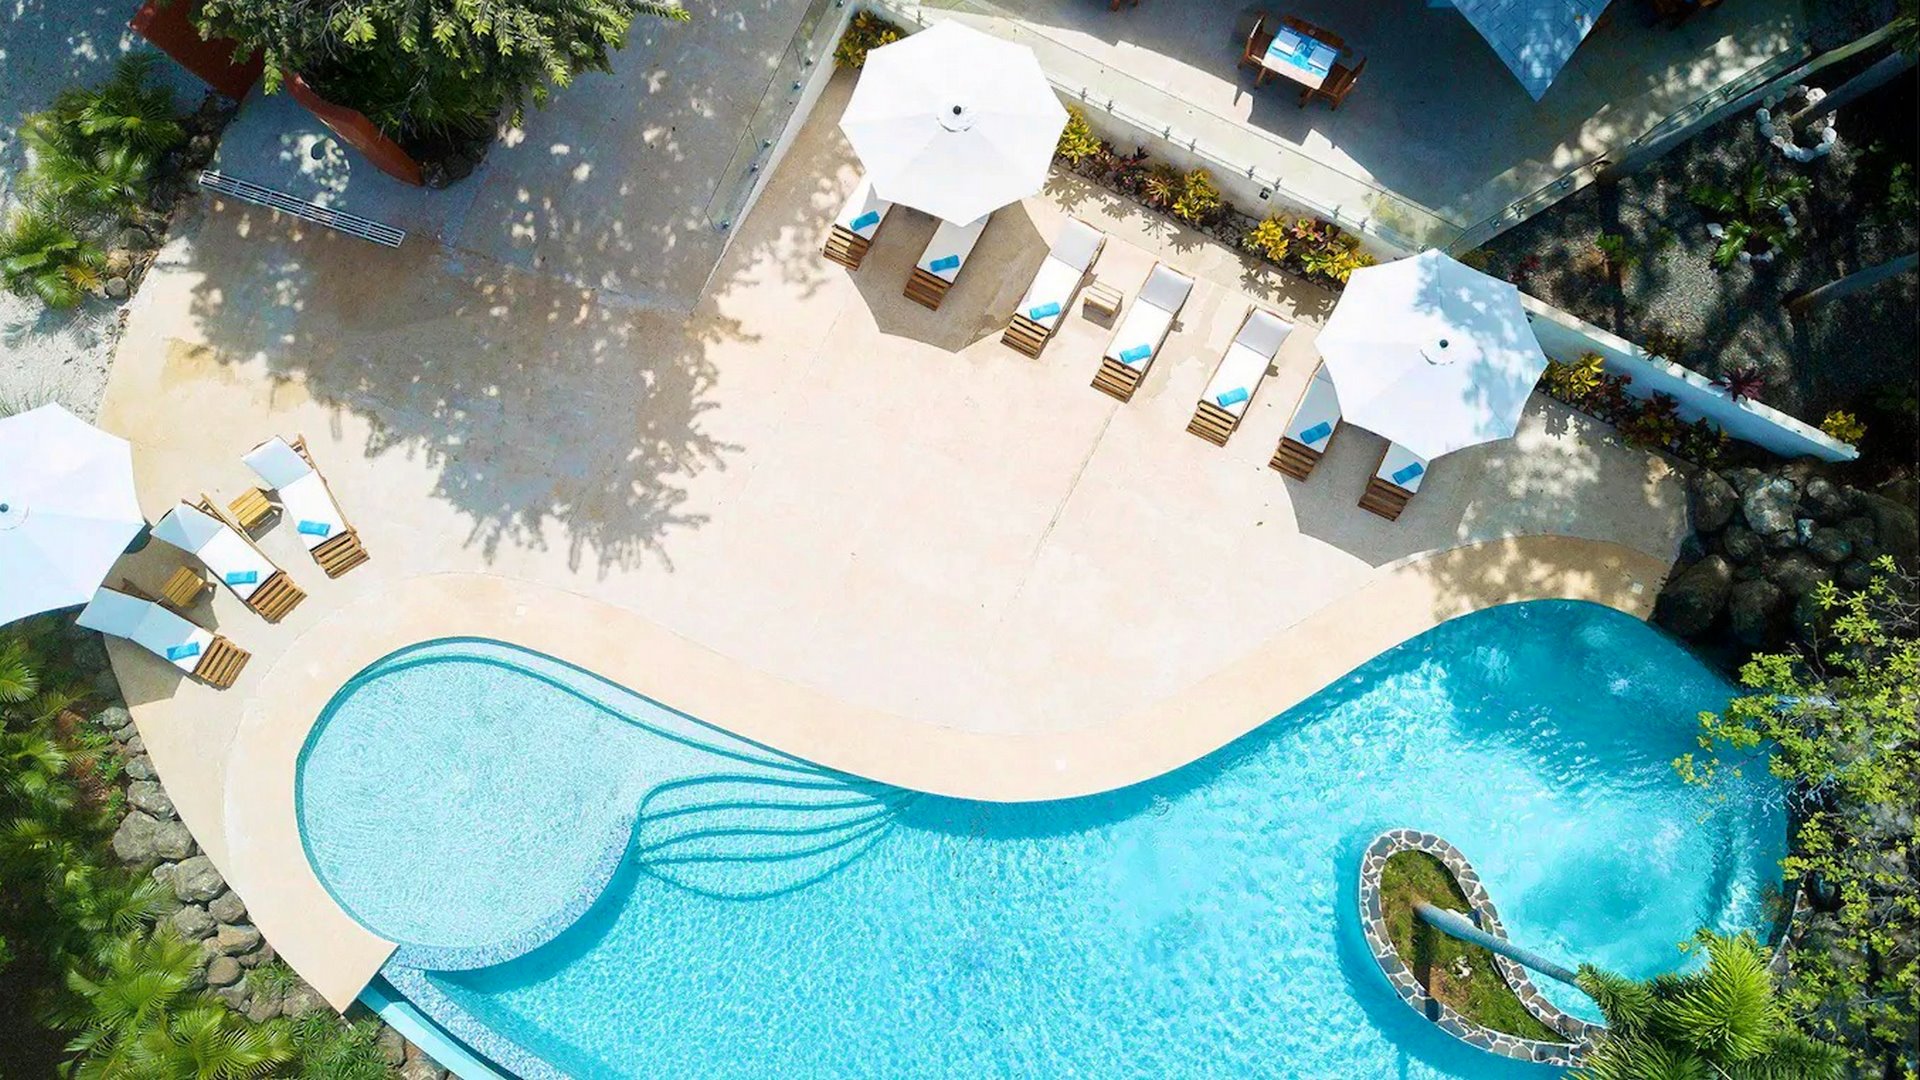 6395-The beautiful swimming pool of the upscale lodge for sale in Guanacaste